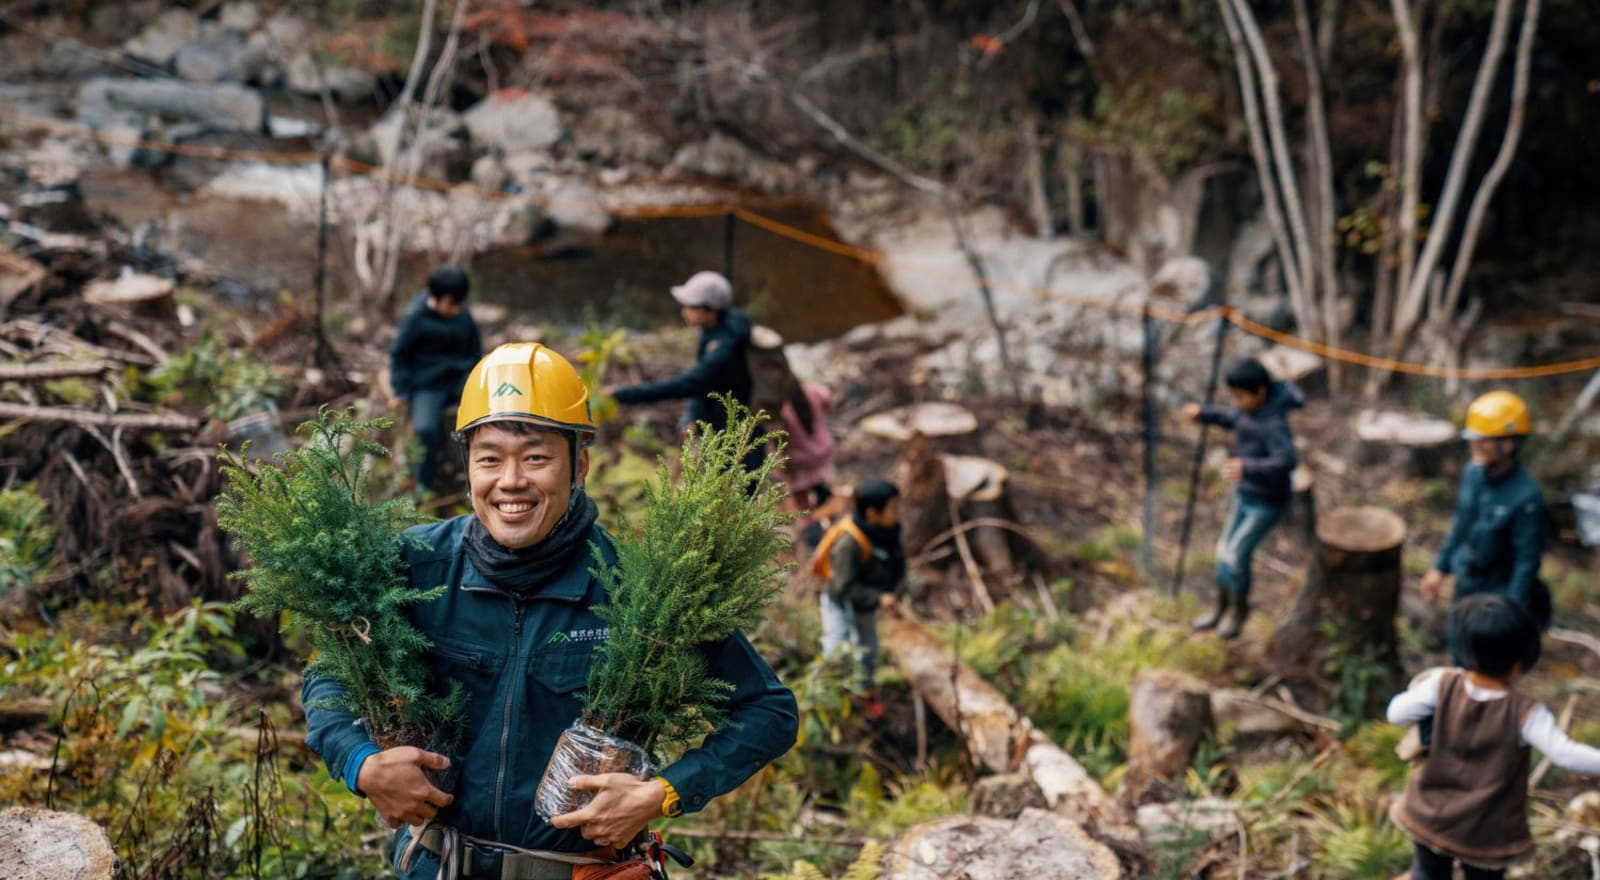 Man holding two small trees smiling to camera while other people plant trees in background